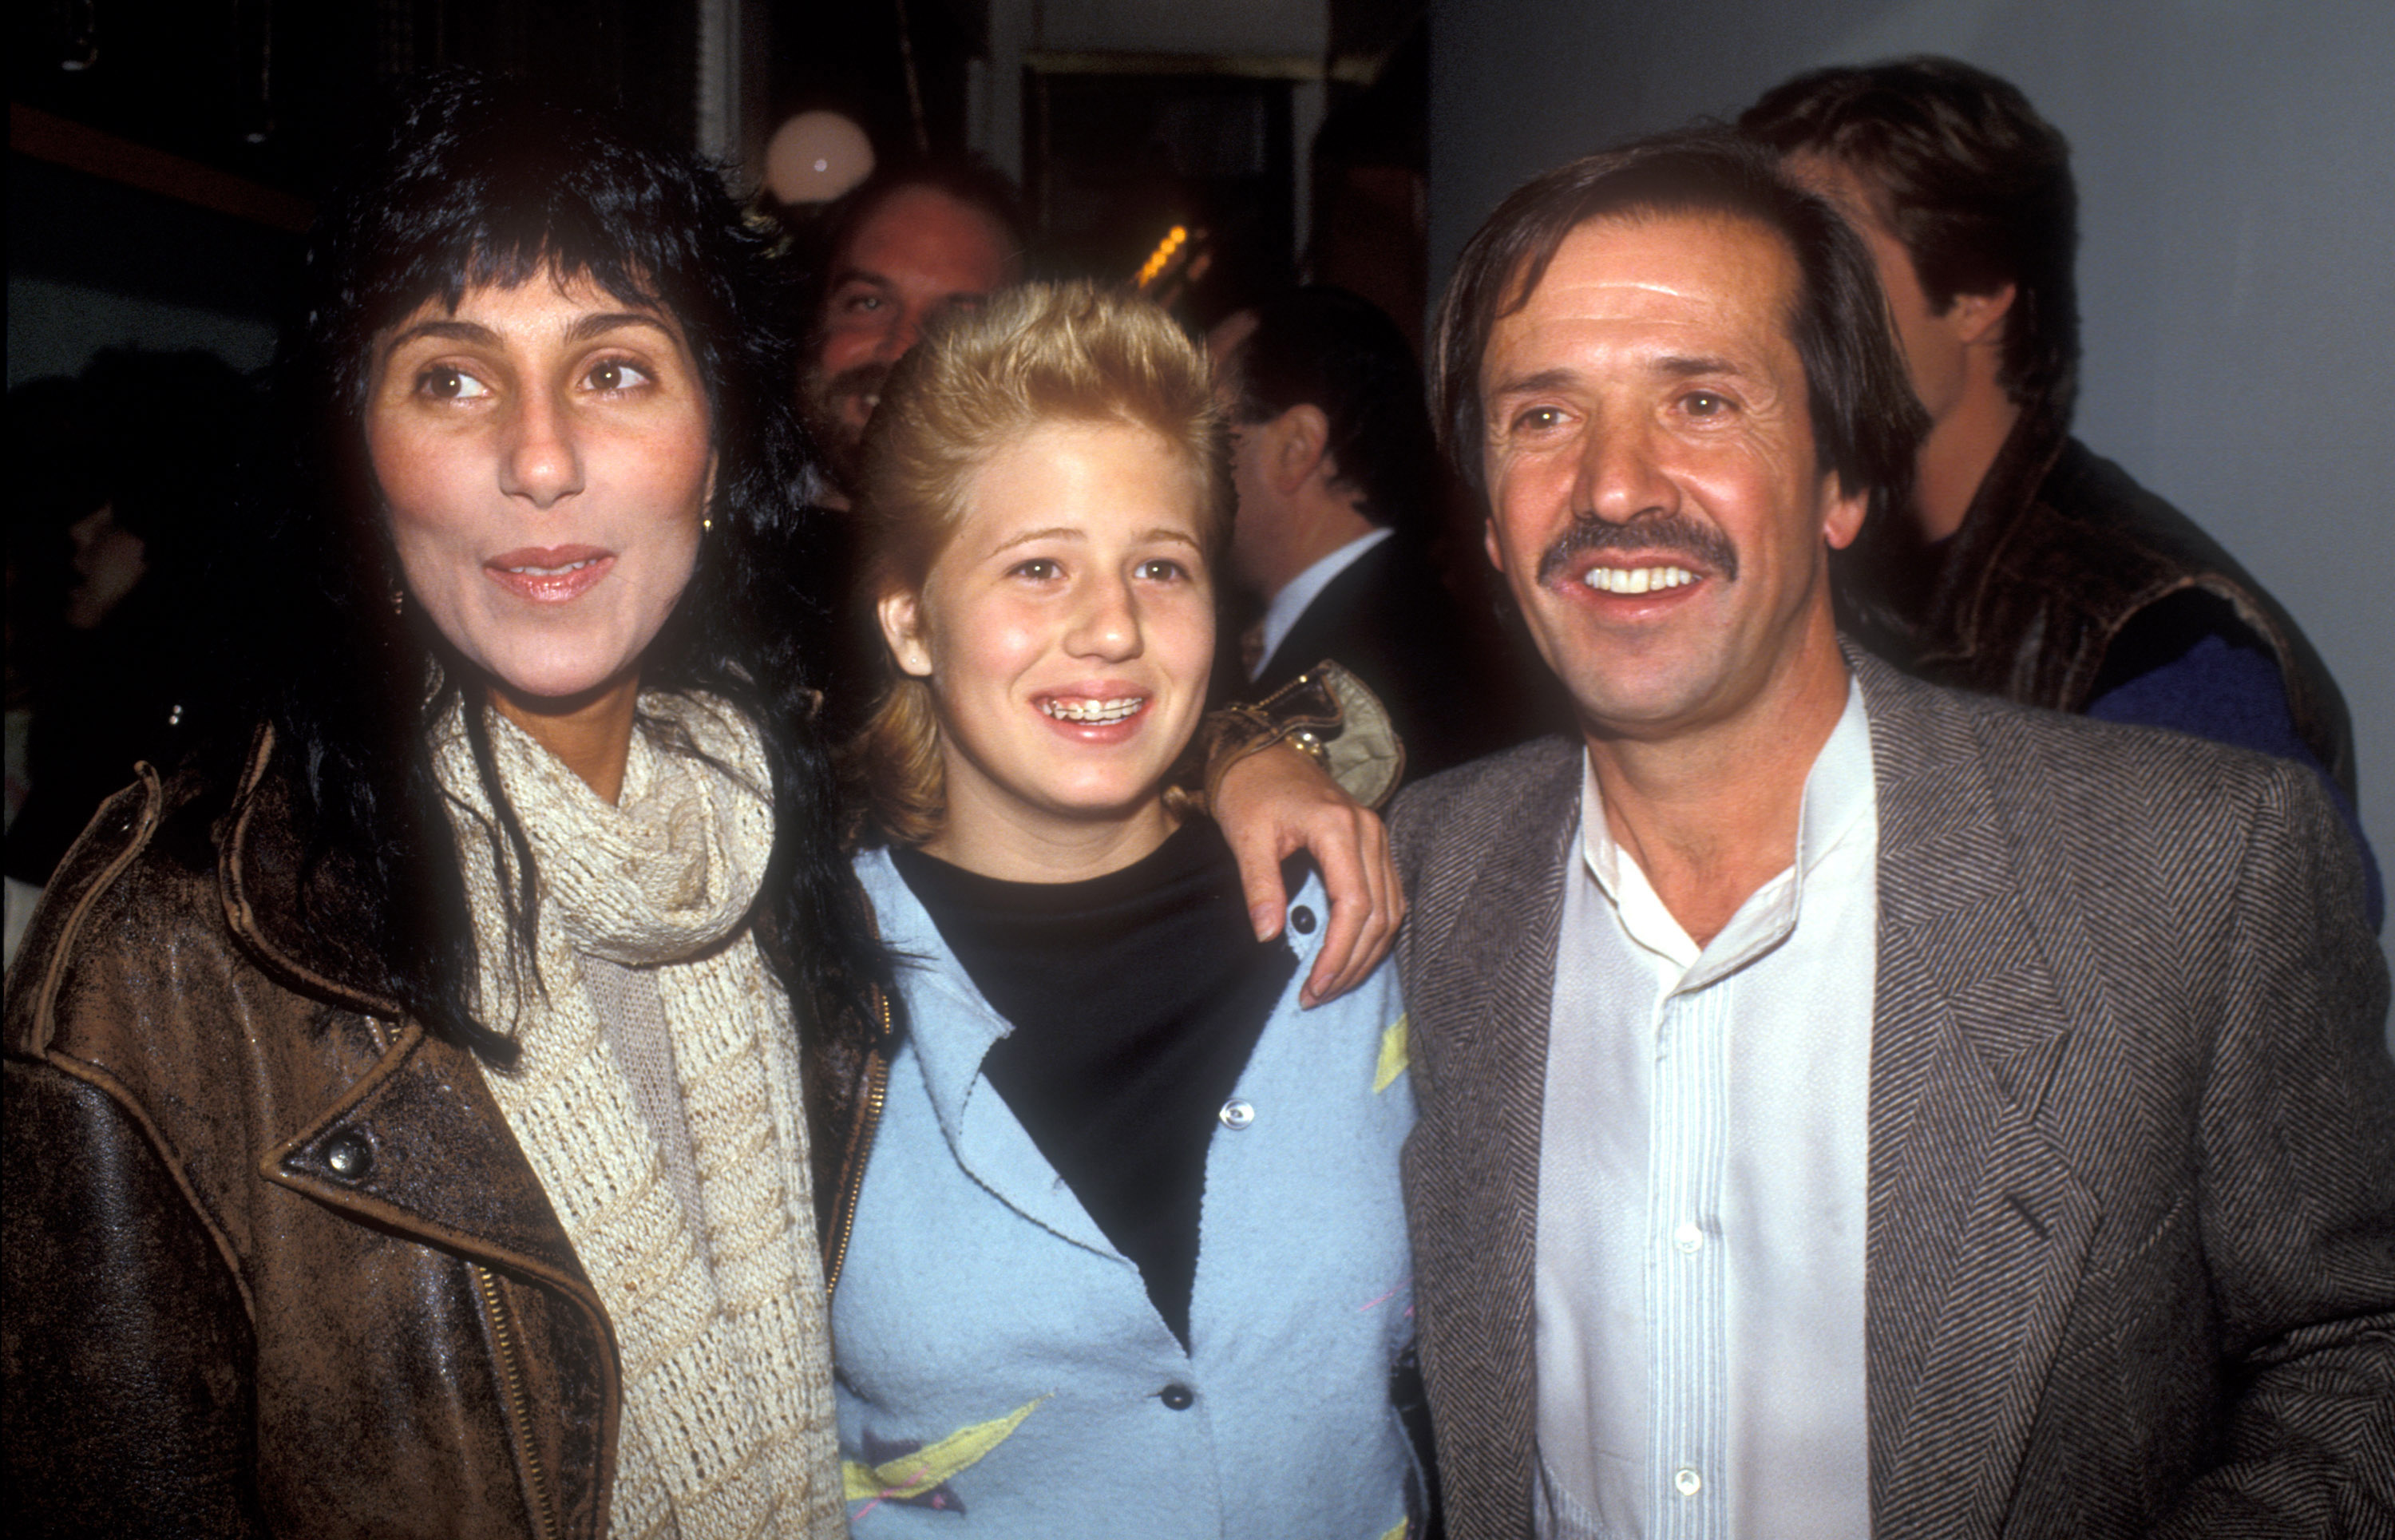 Cher, Chastity and Sonny Bono at Bono's restaurant opening | Source: Getty Images